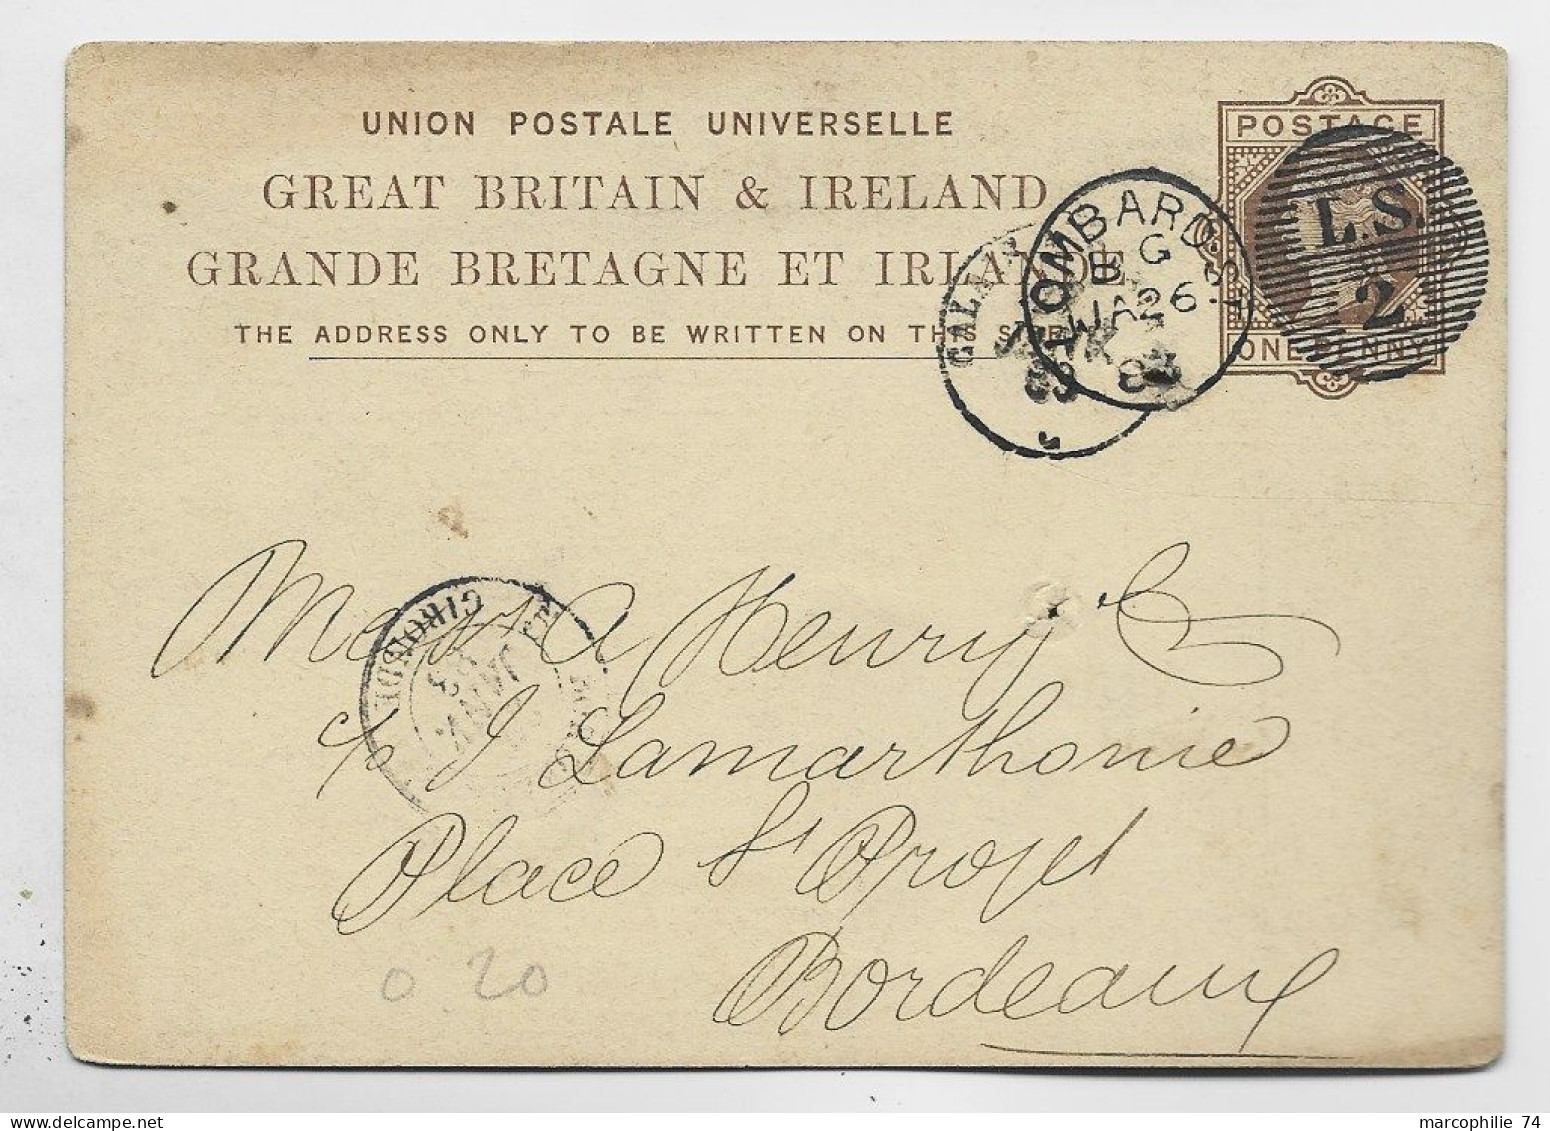 ENGLAND ENTIER GREAT BRITAIN IRELAND ONE PENNY POST CARD REPIQUAGE GENERAM STEAM NAVIGATION LOMBARD 1893 TO FRANCE - Entiers Postaux